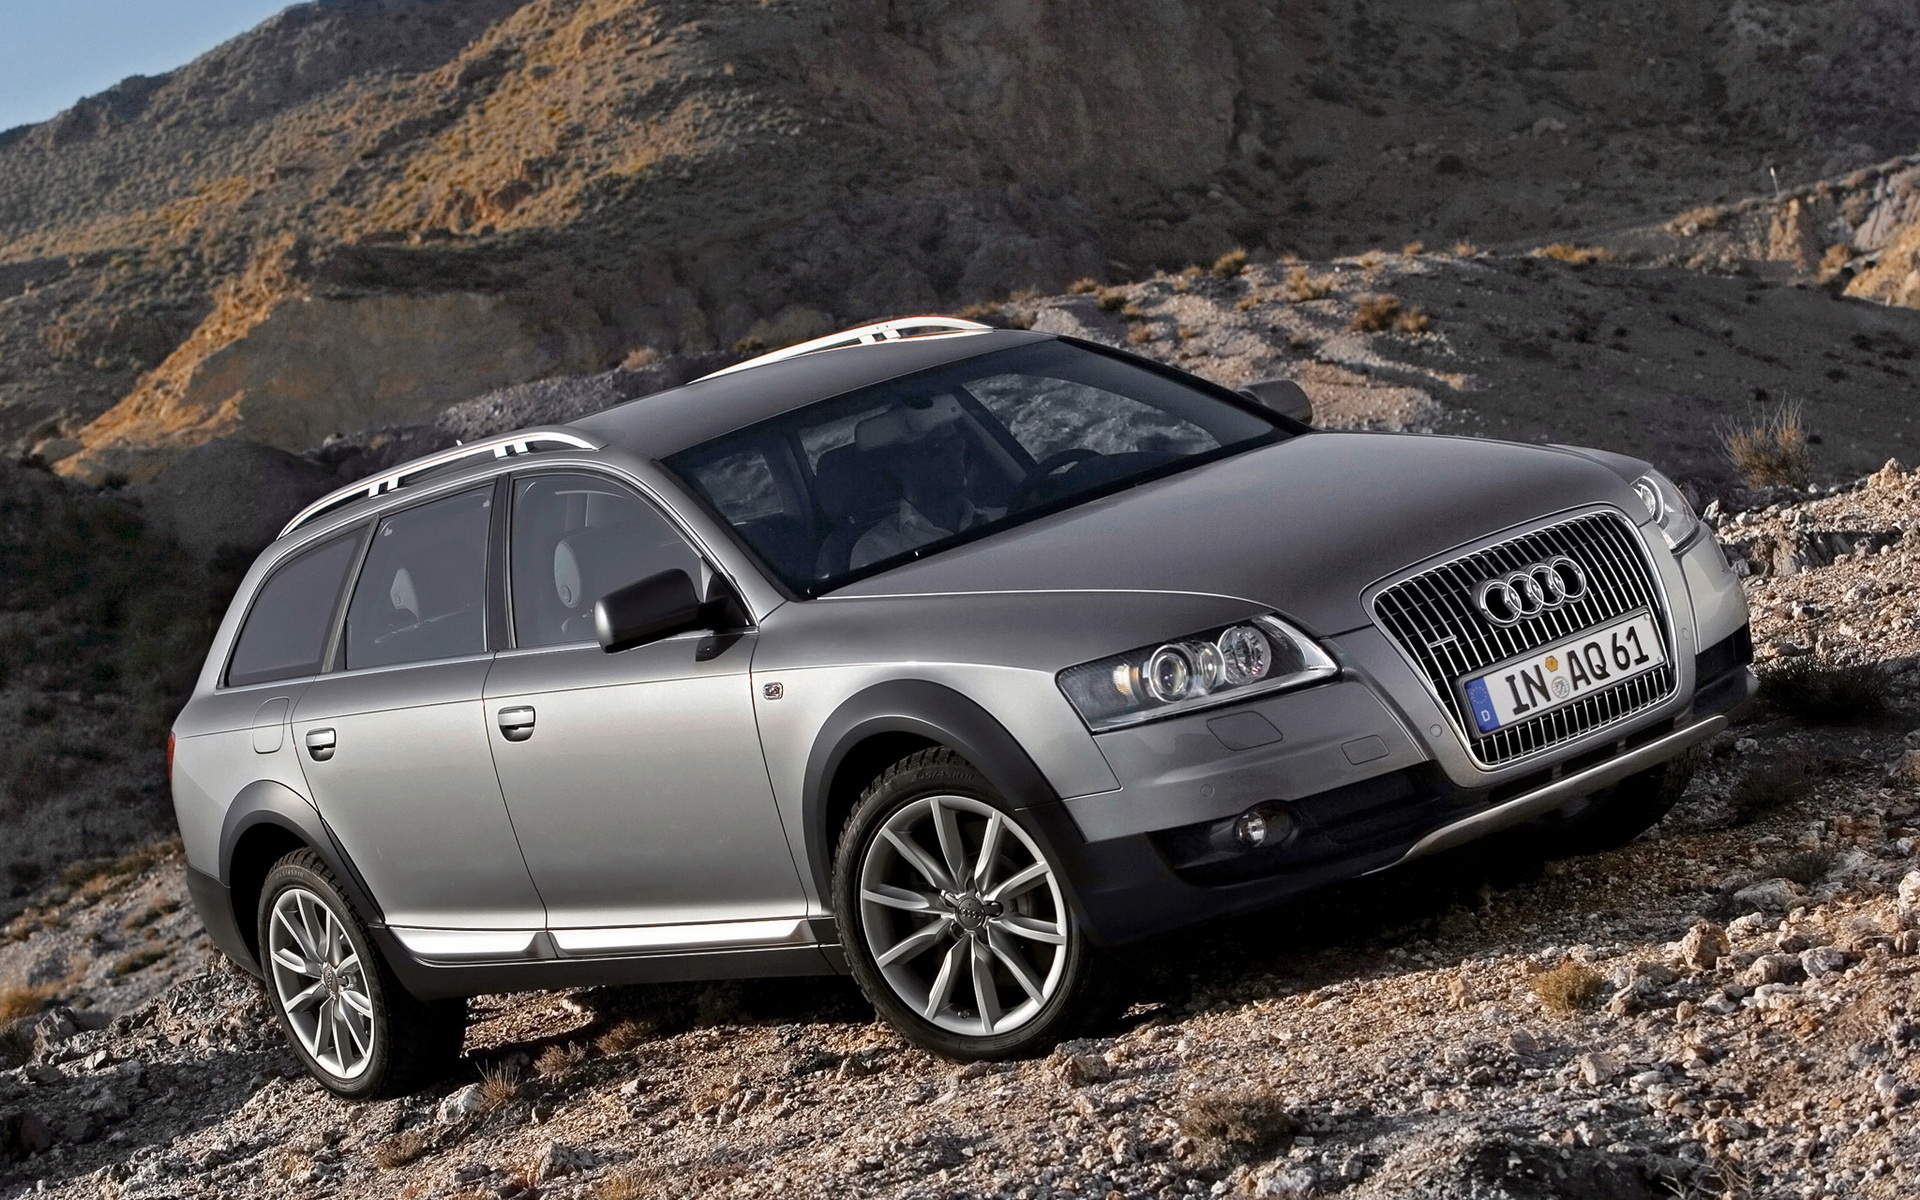 Audi A6 Allroad 42 Quattro wallpapers and images